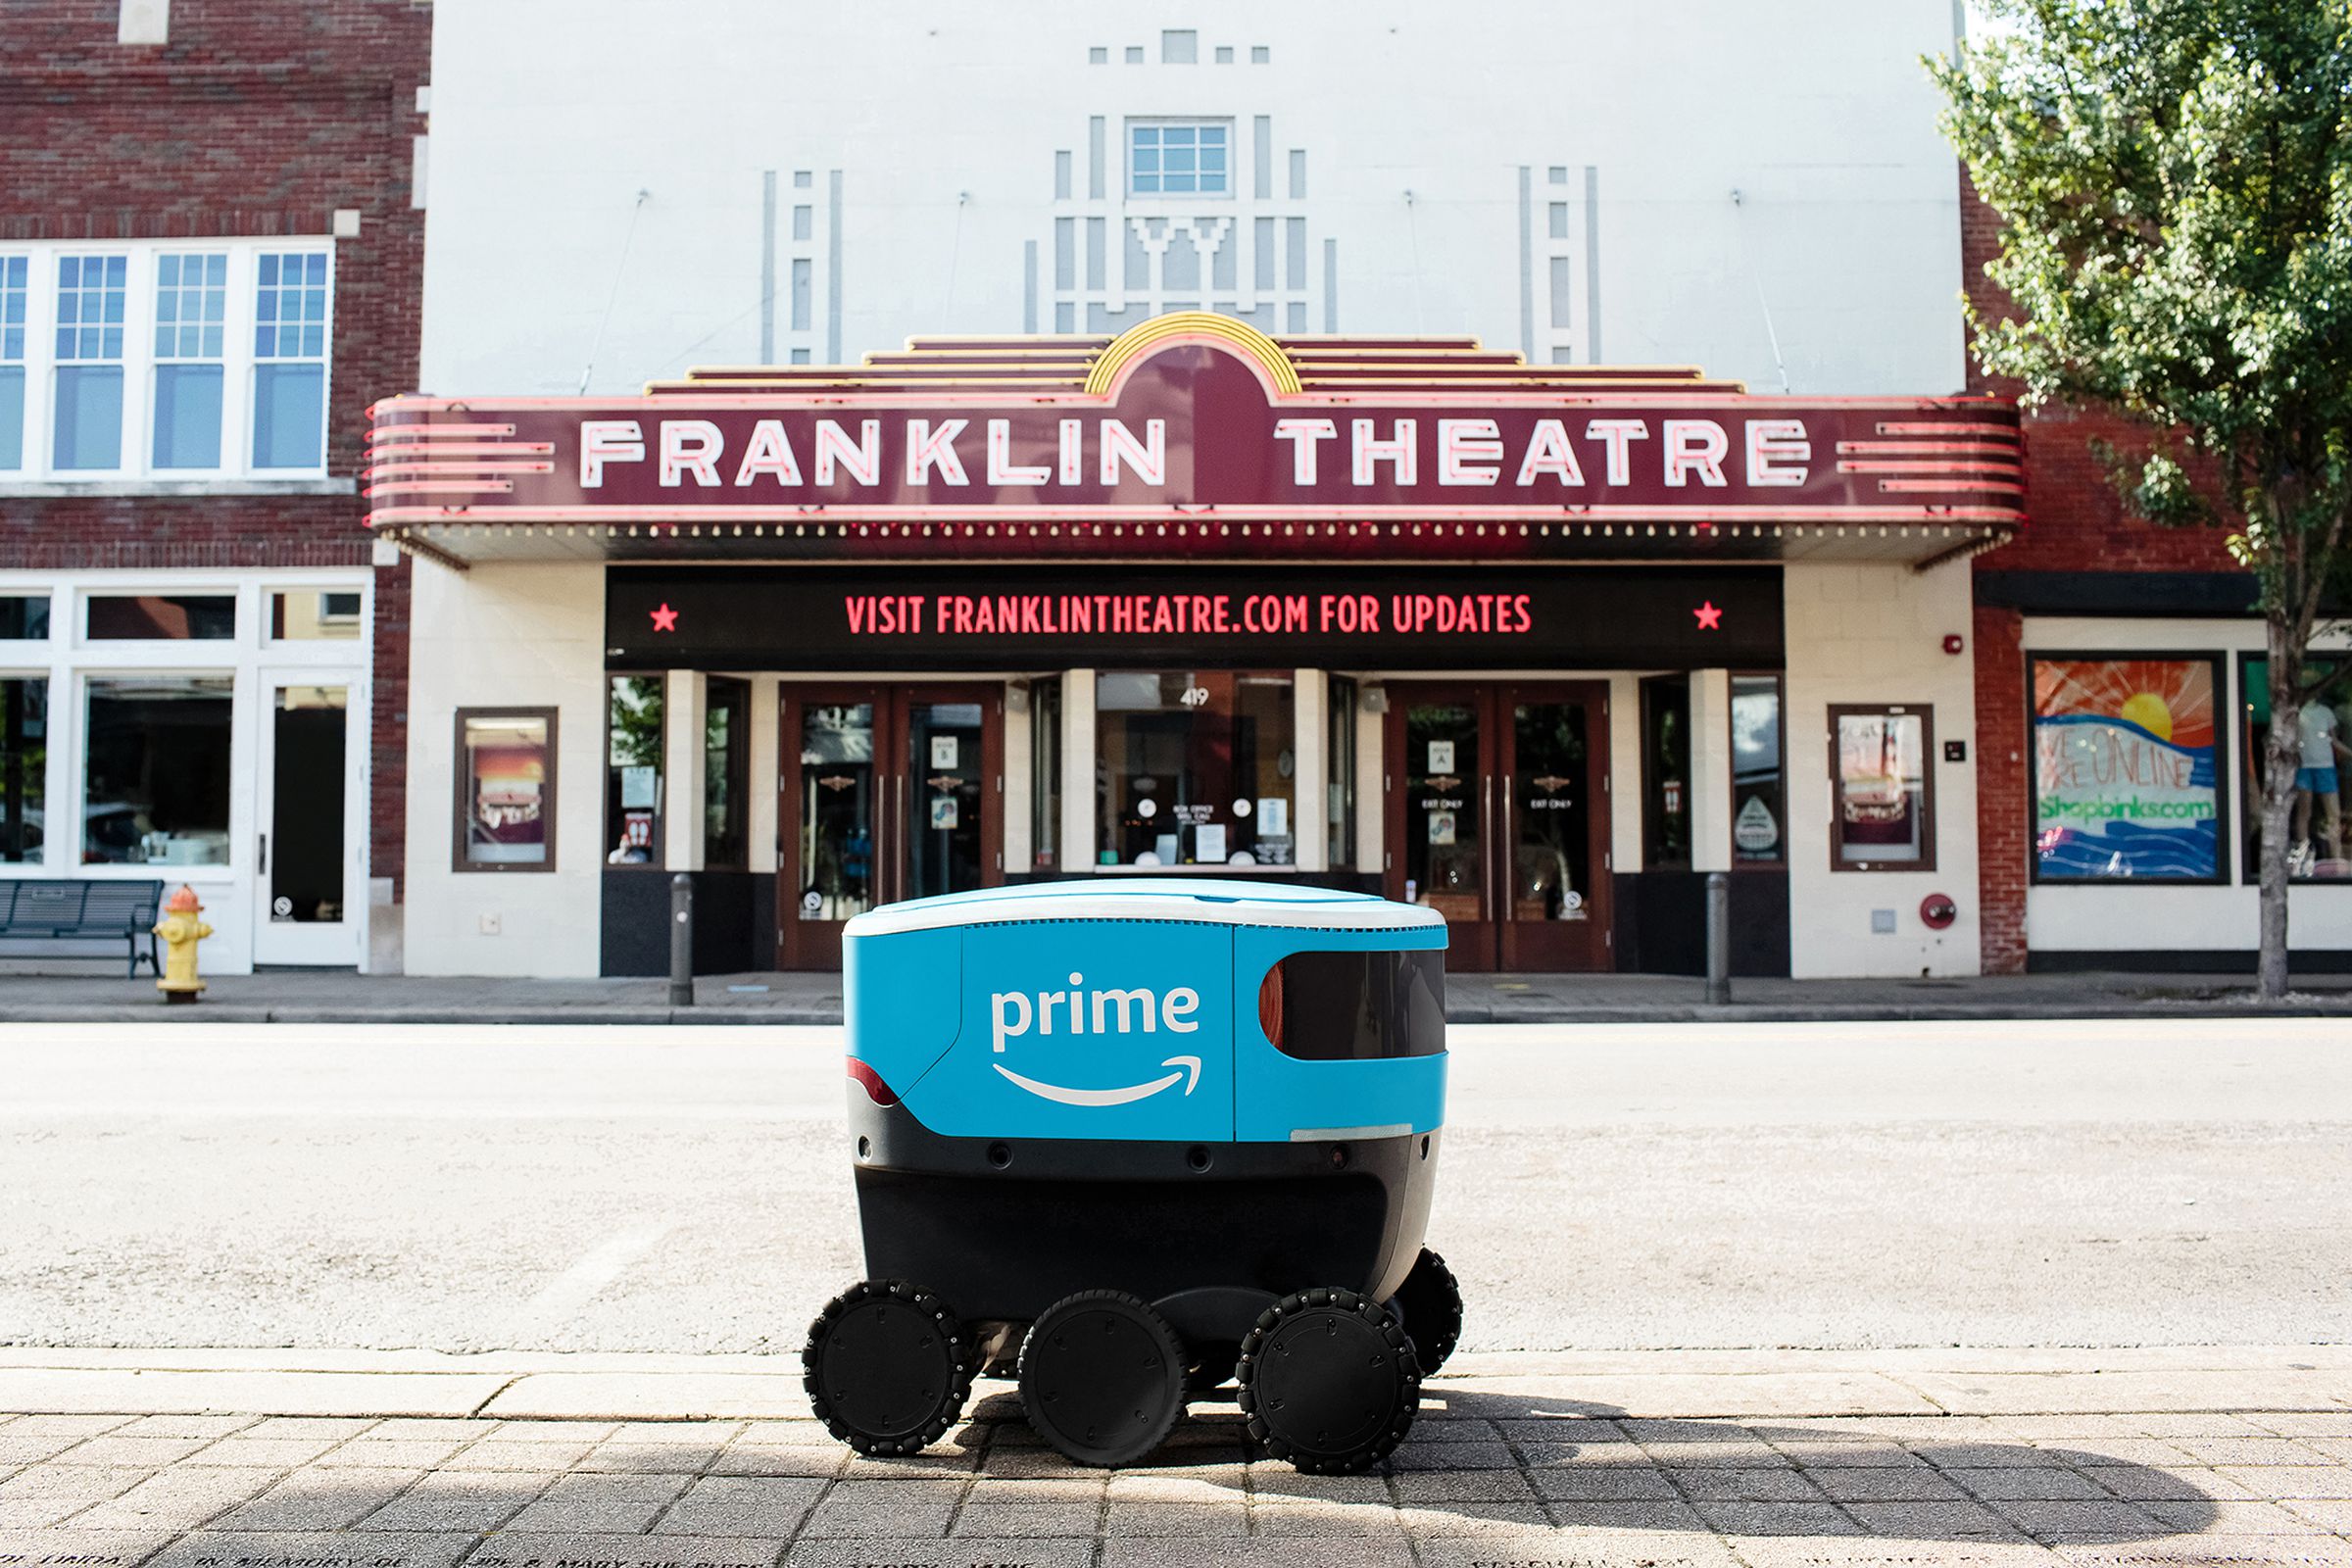 Amazon’s Scout robots navigate autonomously, but are accompanied by human minders at all times.